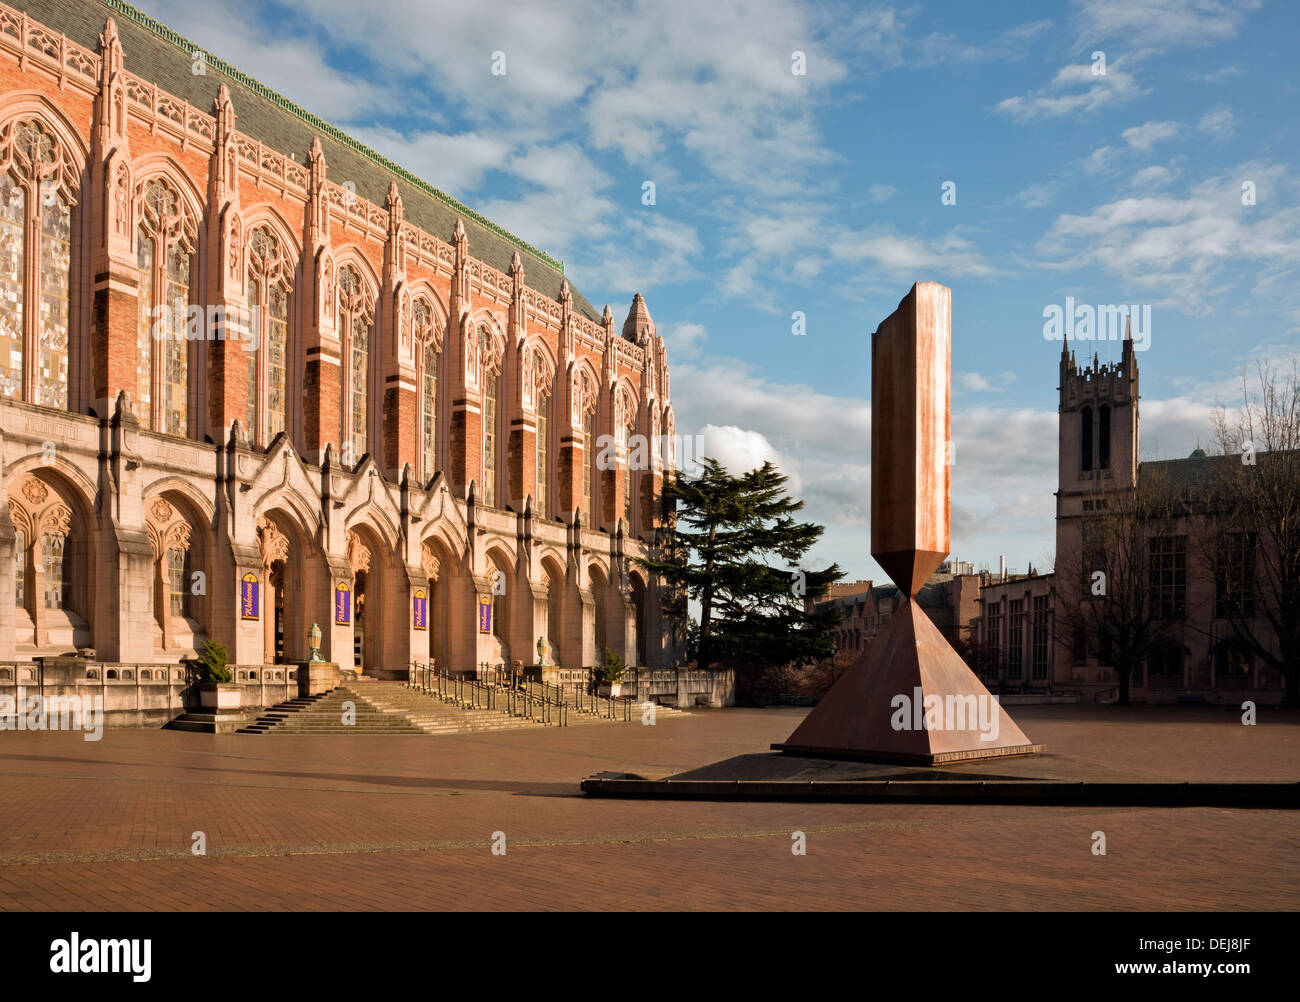 WASHINGTON - Evening at Red Square with the Broken Obelisk and Suzzallo Library at the University of Washington in Seattle. Stock Photo